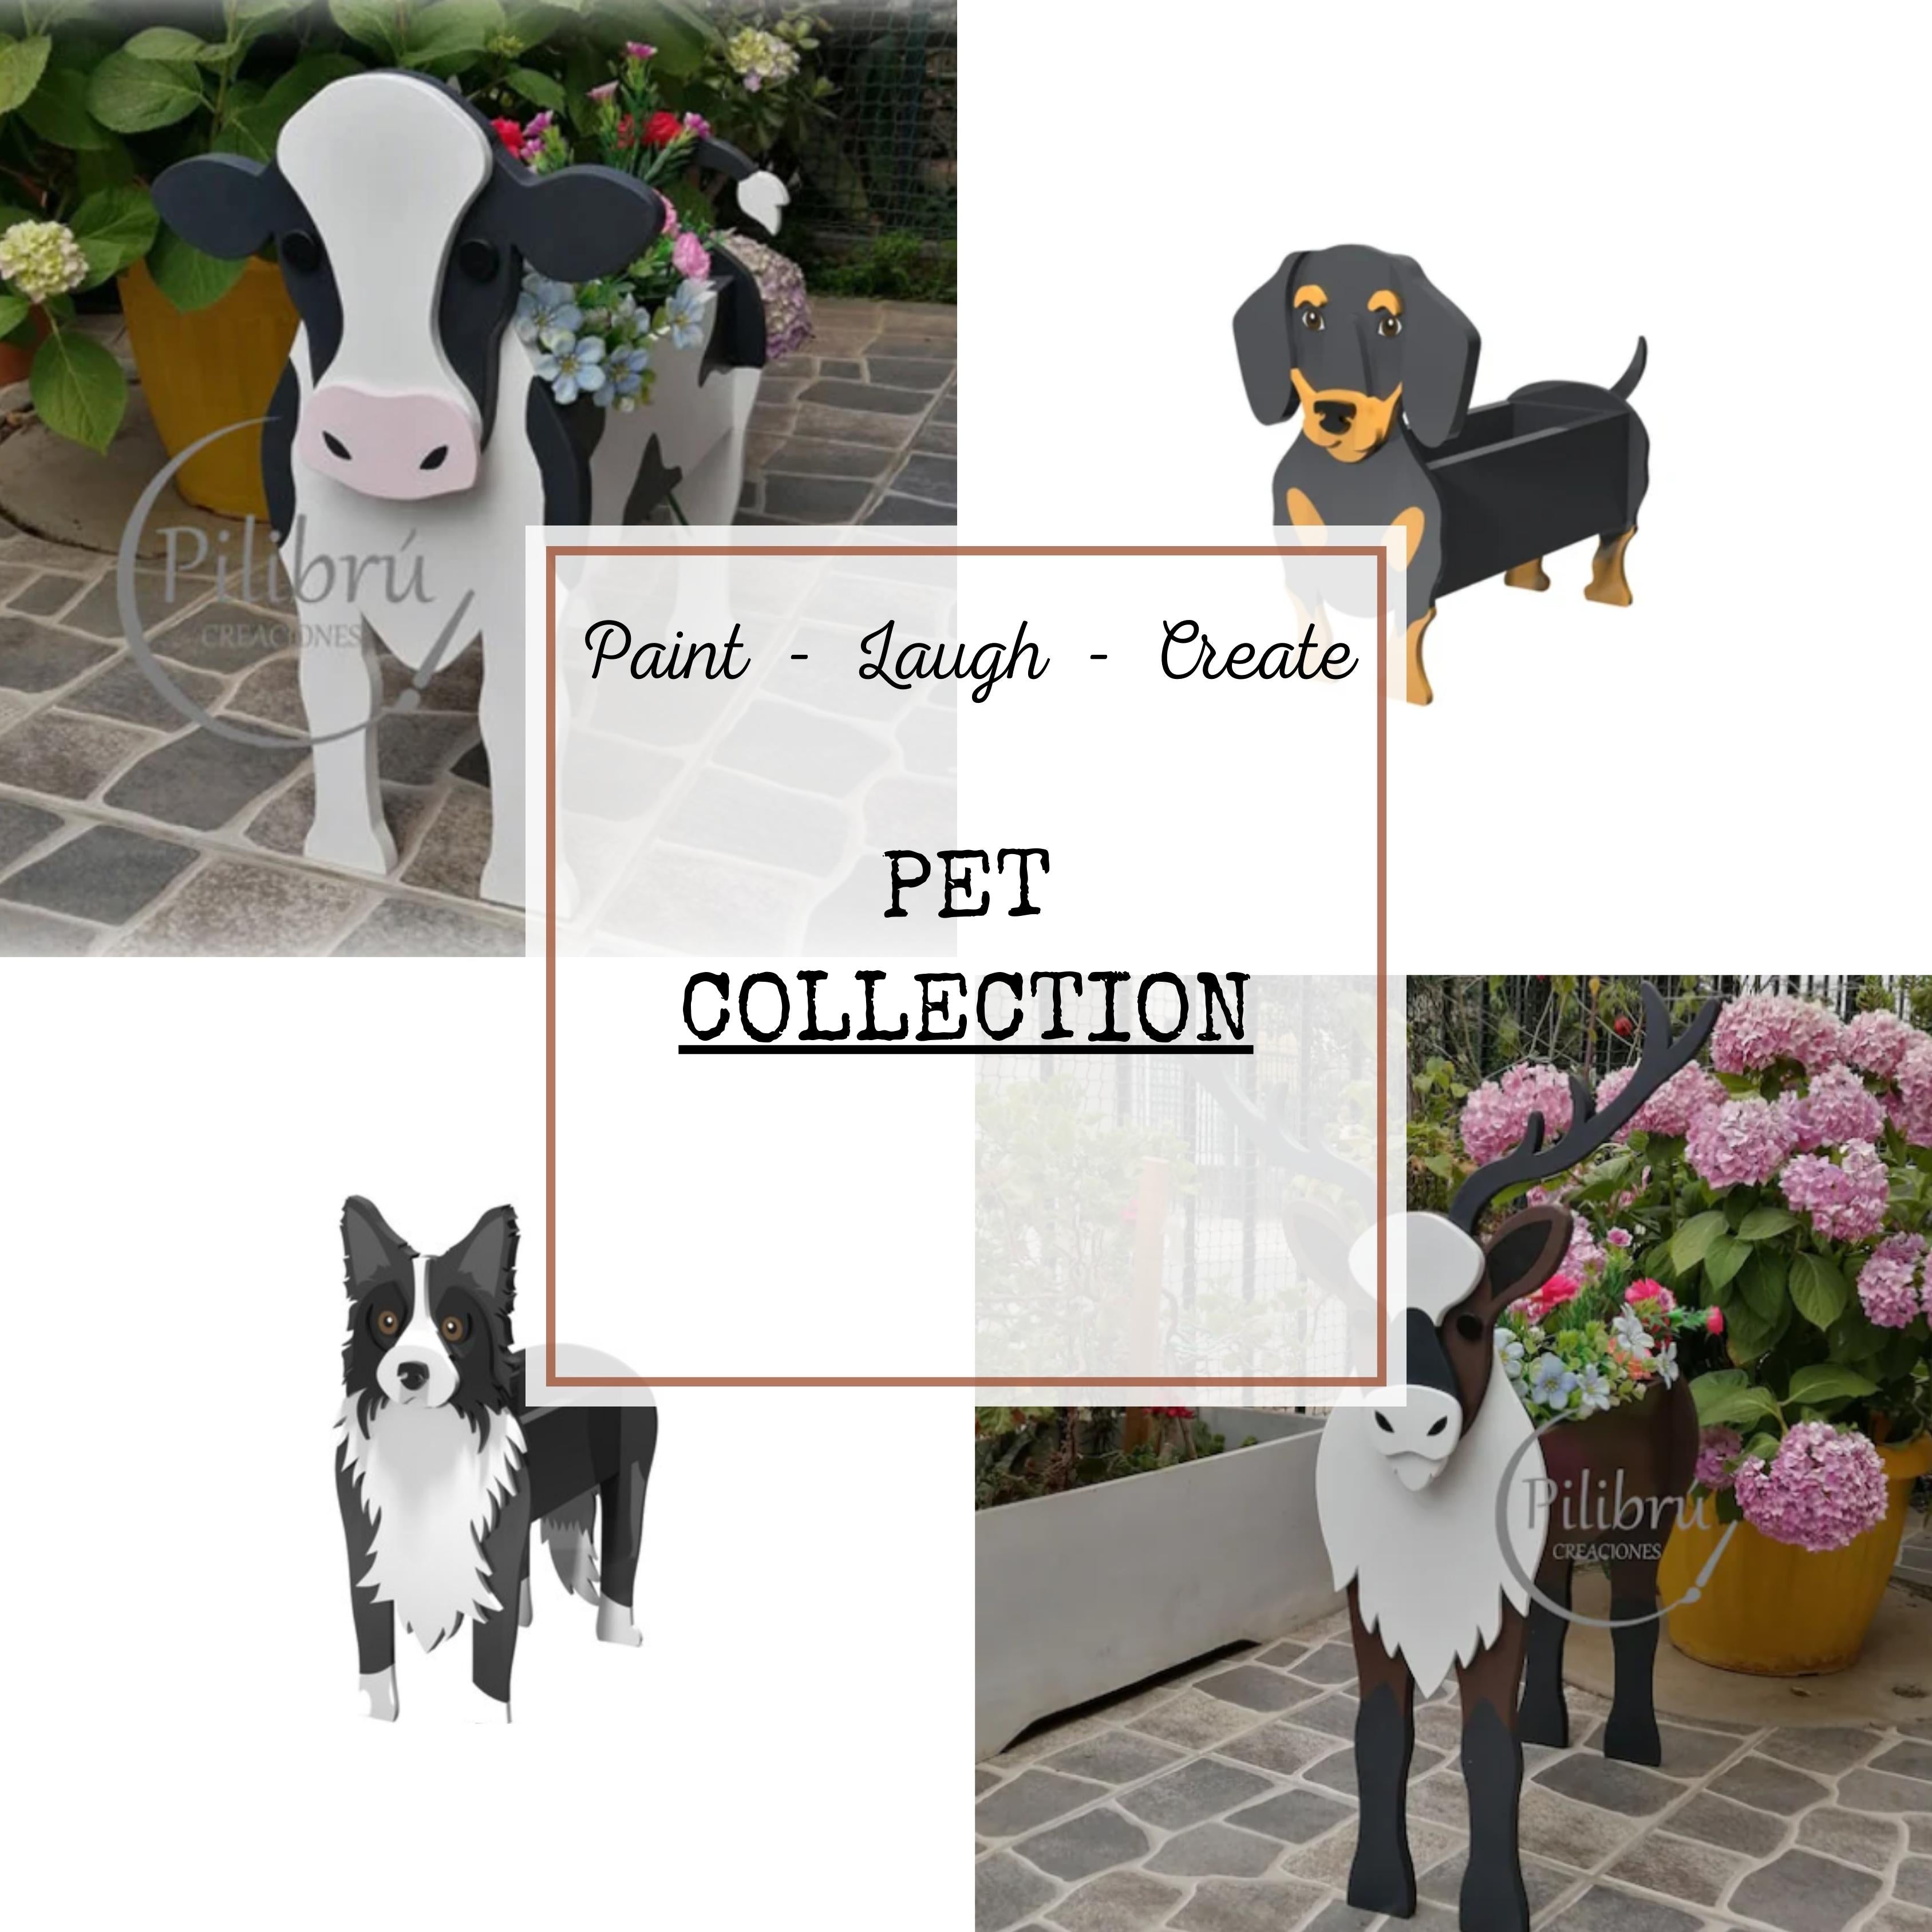 PET & LIVESTOCK COLLECTION